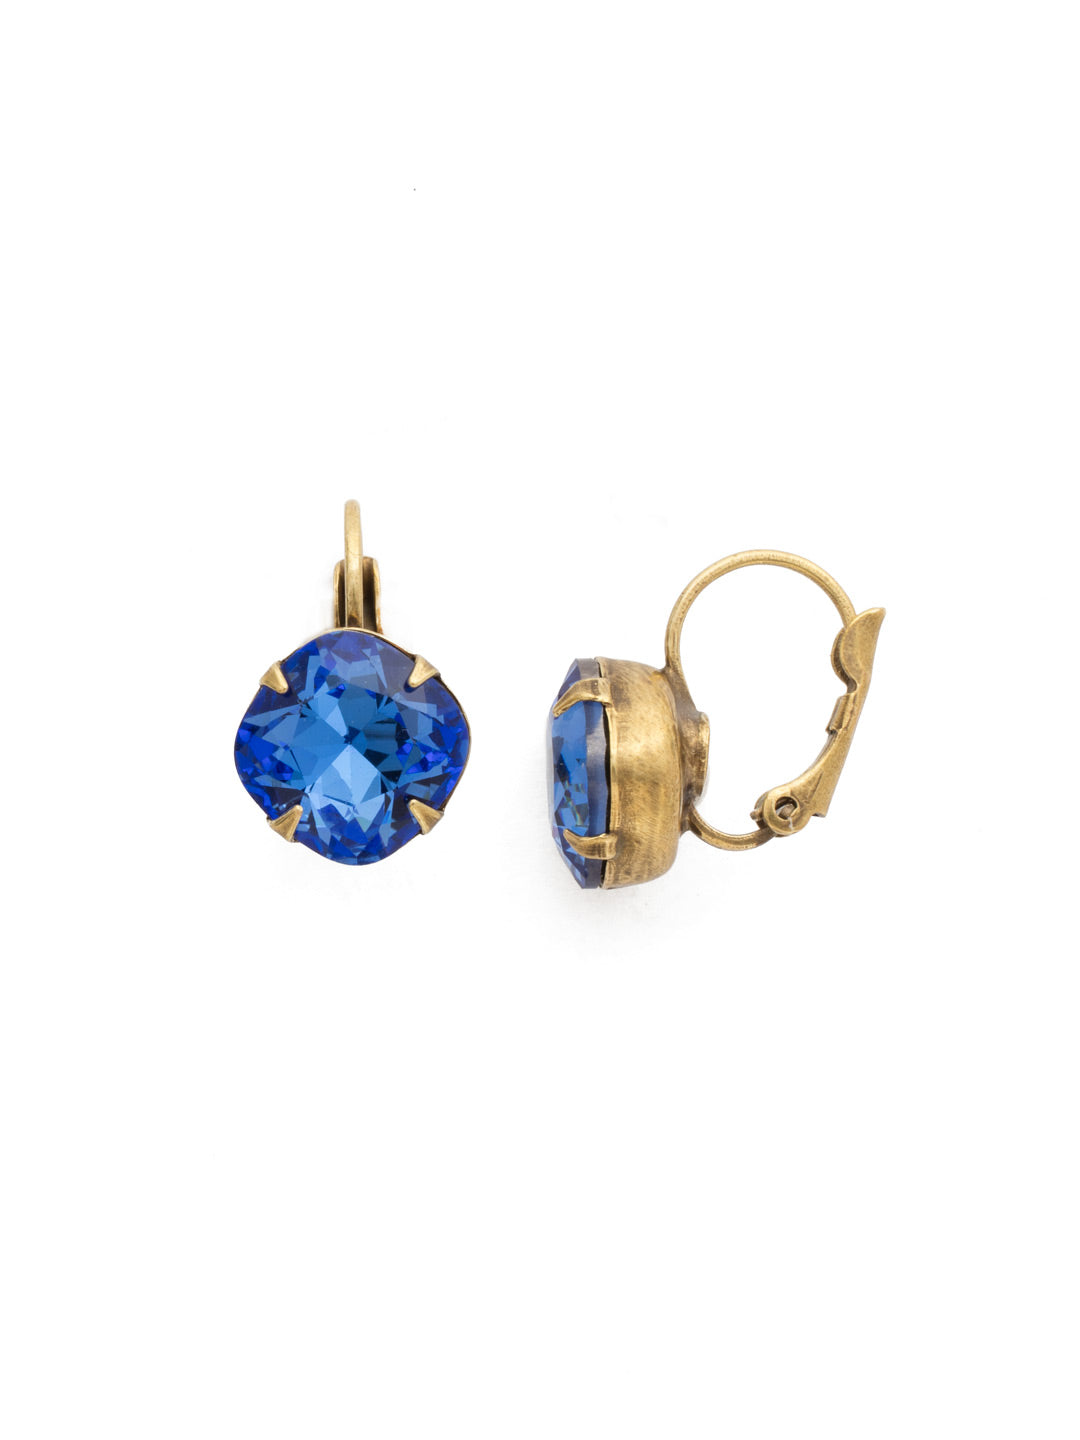 Cushion-Cut Dangle Earrings - EDL12AGSAP - <p>A simple, yet stunning earring featuring a cushion cut crystal that will never go out of style. From Sorrelli's Sapphire collection in our Antique Gold-tone finish.</p>